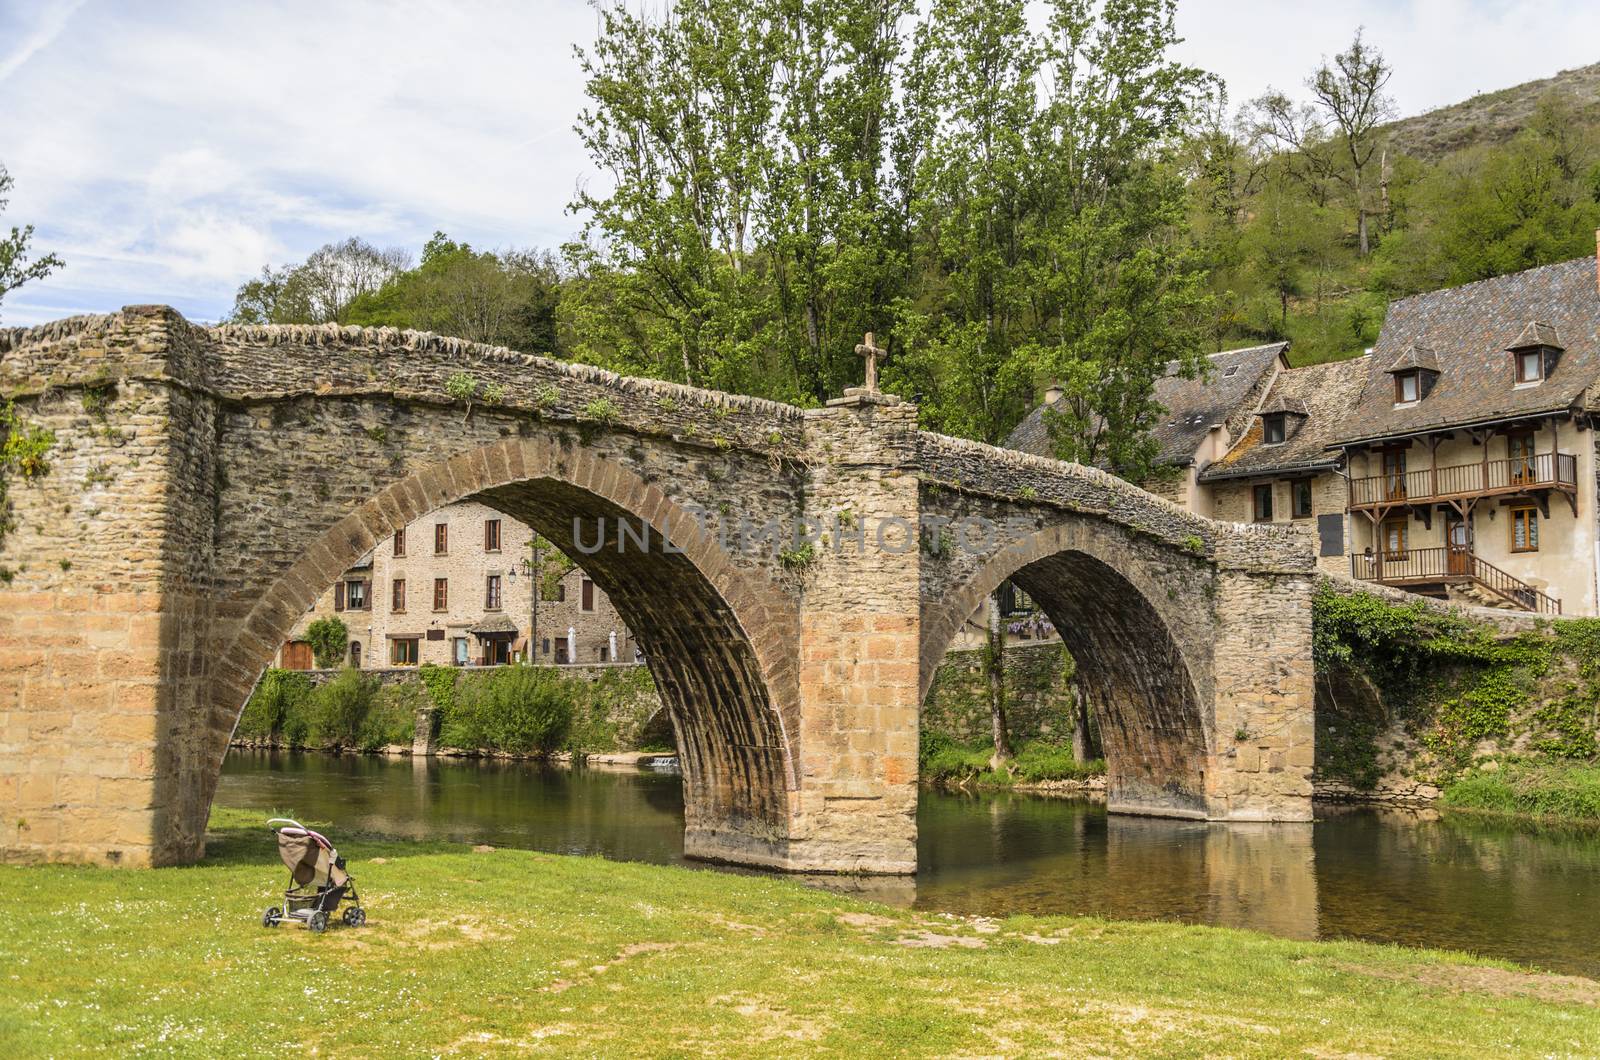 Bridge over the river Aveyron that gives name to the department in the French region of midi pyrenees at the height of the medieval village of Belcastel cataloged as one of the most beautiful villas in France.